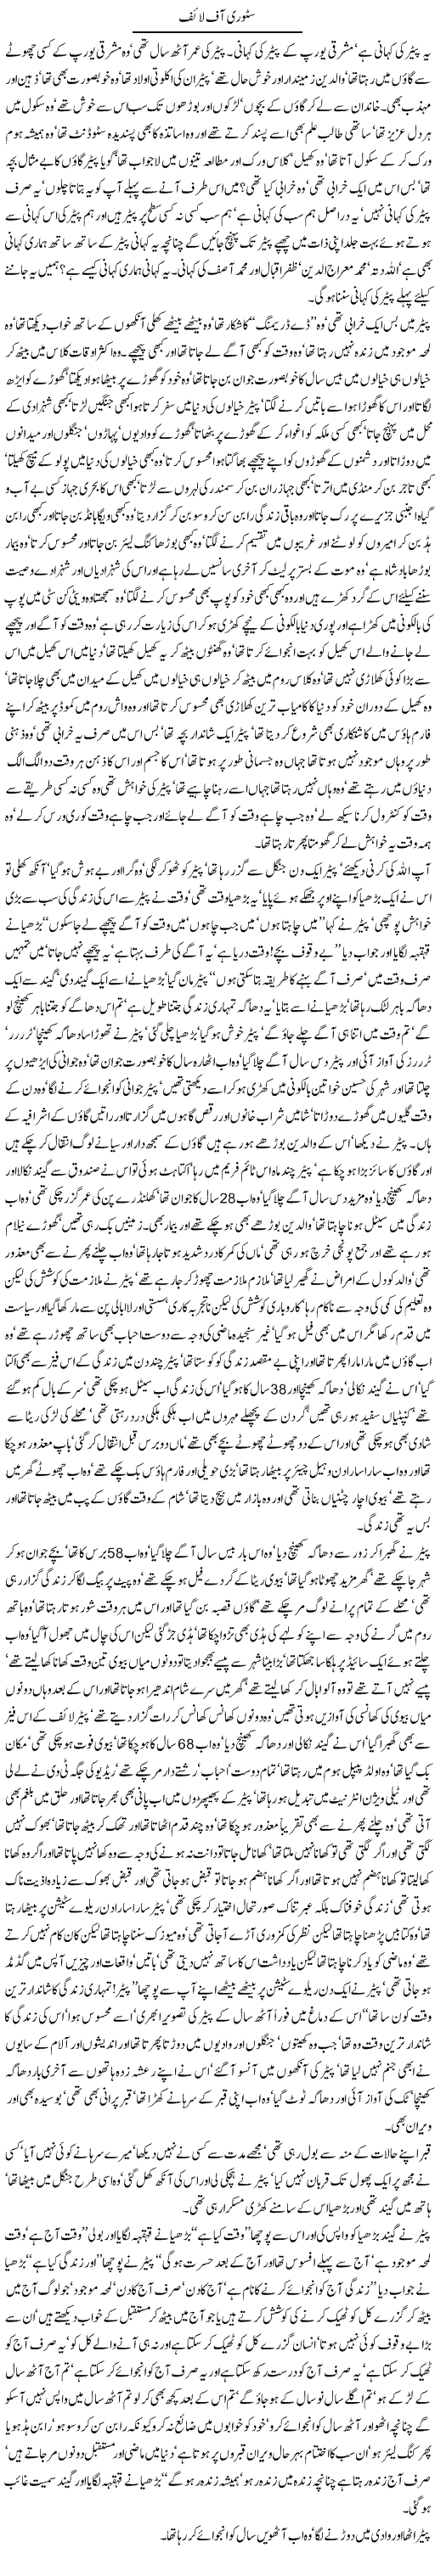 Story of life by Javed Chaudhry